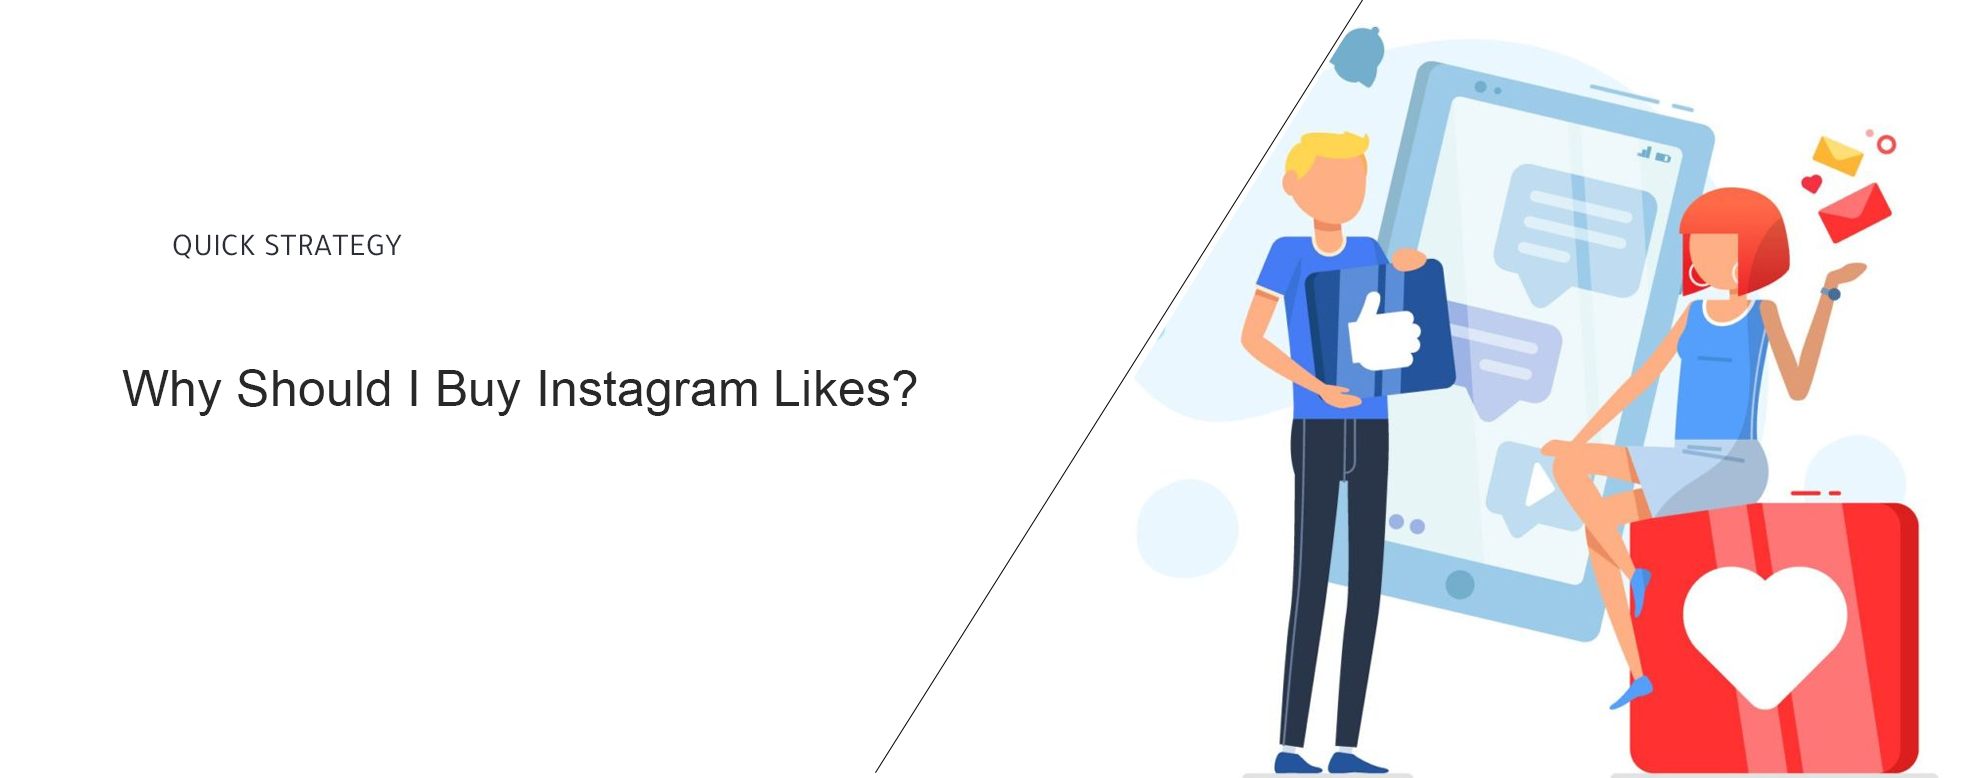 Why Should I Buy Instagram Likes?